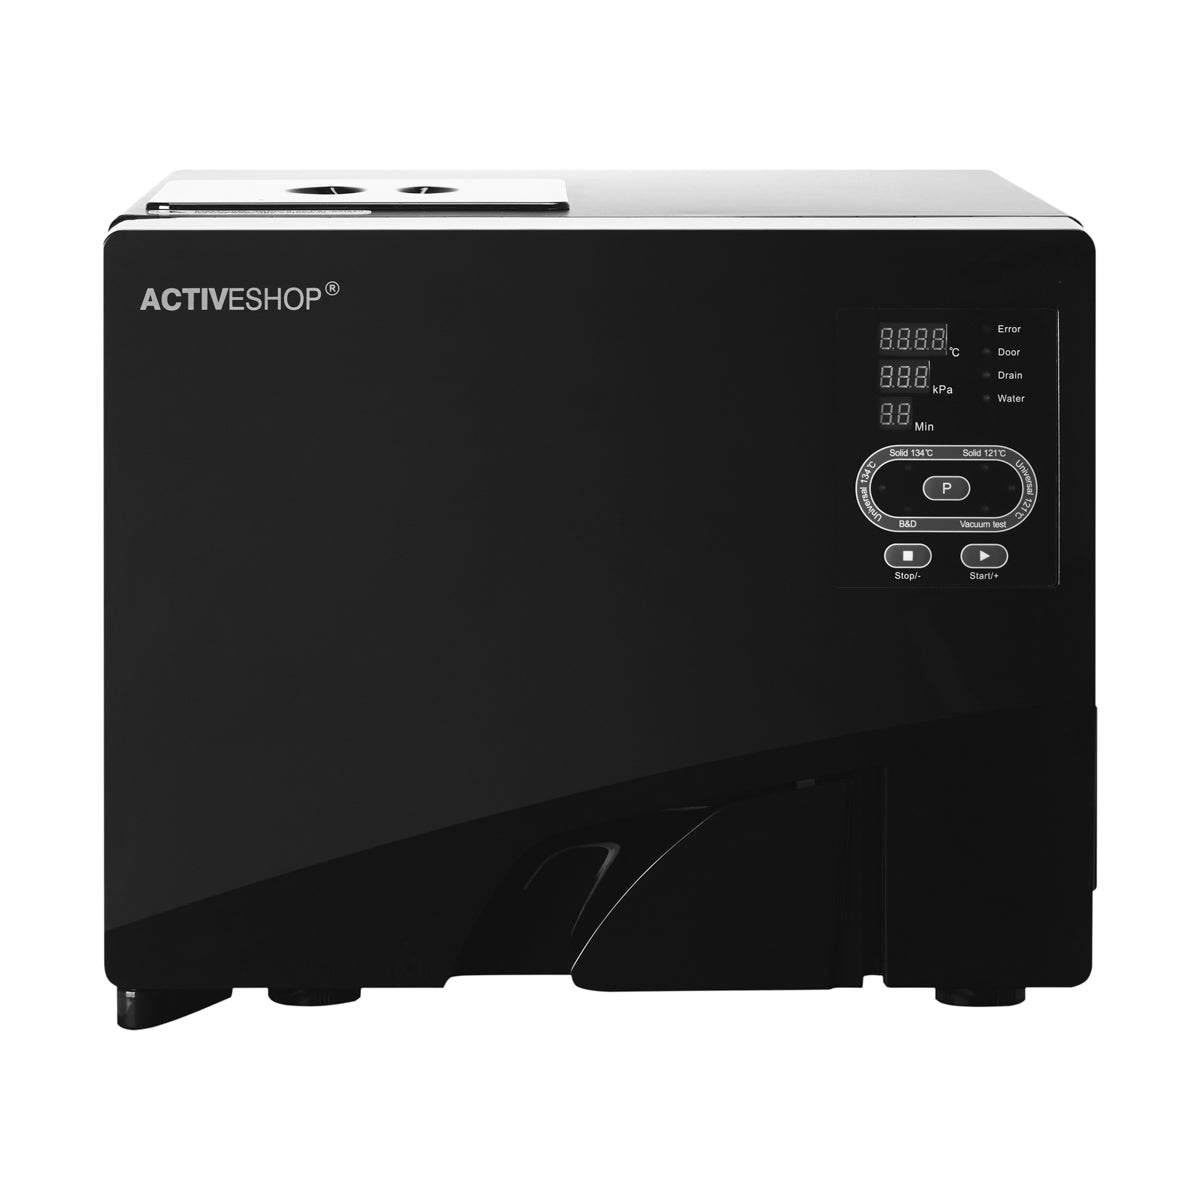 LAFOMED AUTOCLAVE STANDARD LINE LFSS12AA WITH PRINTER 12 L CL. B MEDICAL BLACK